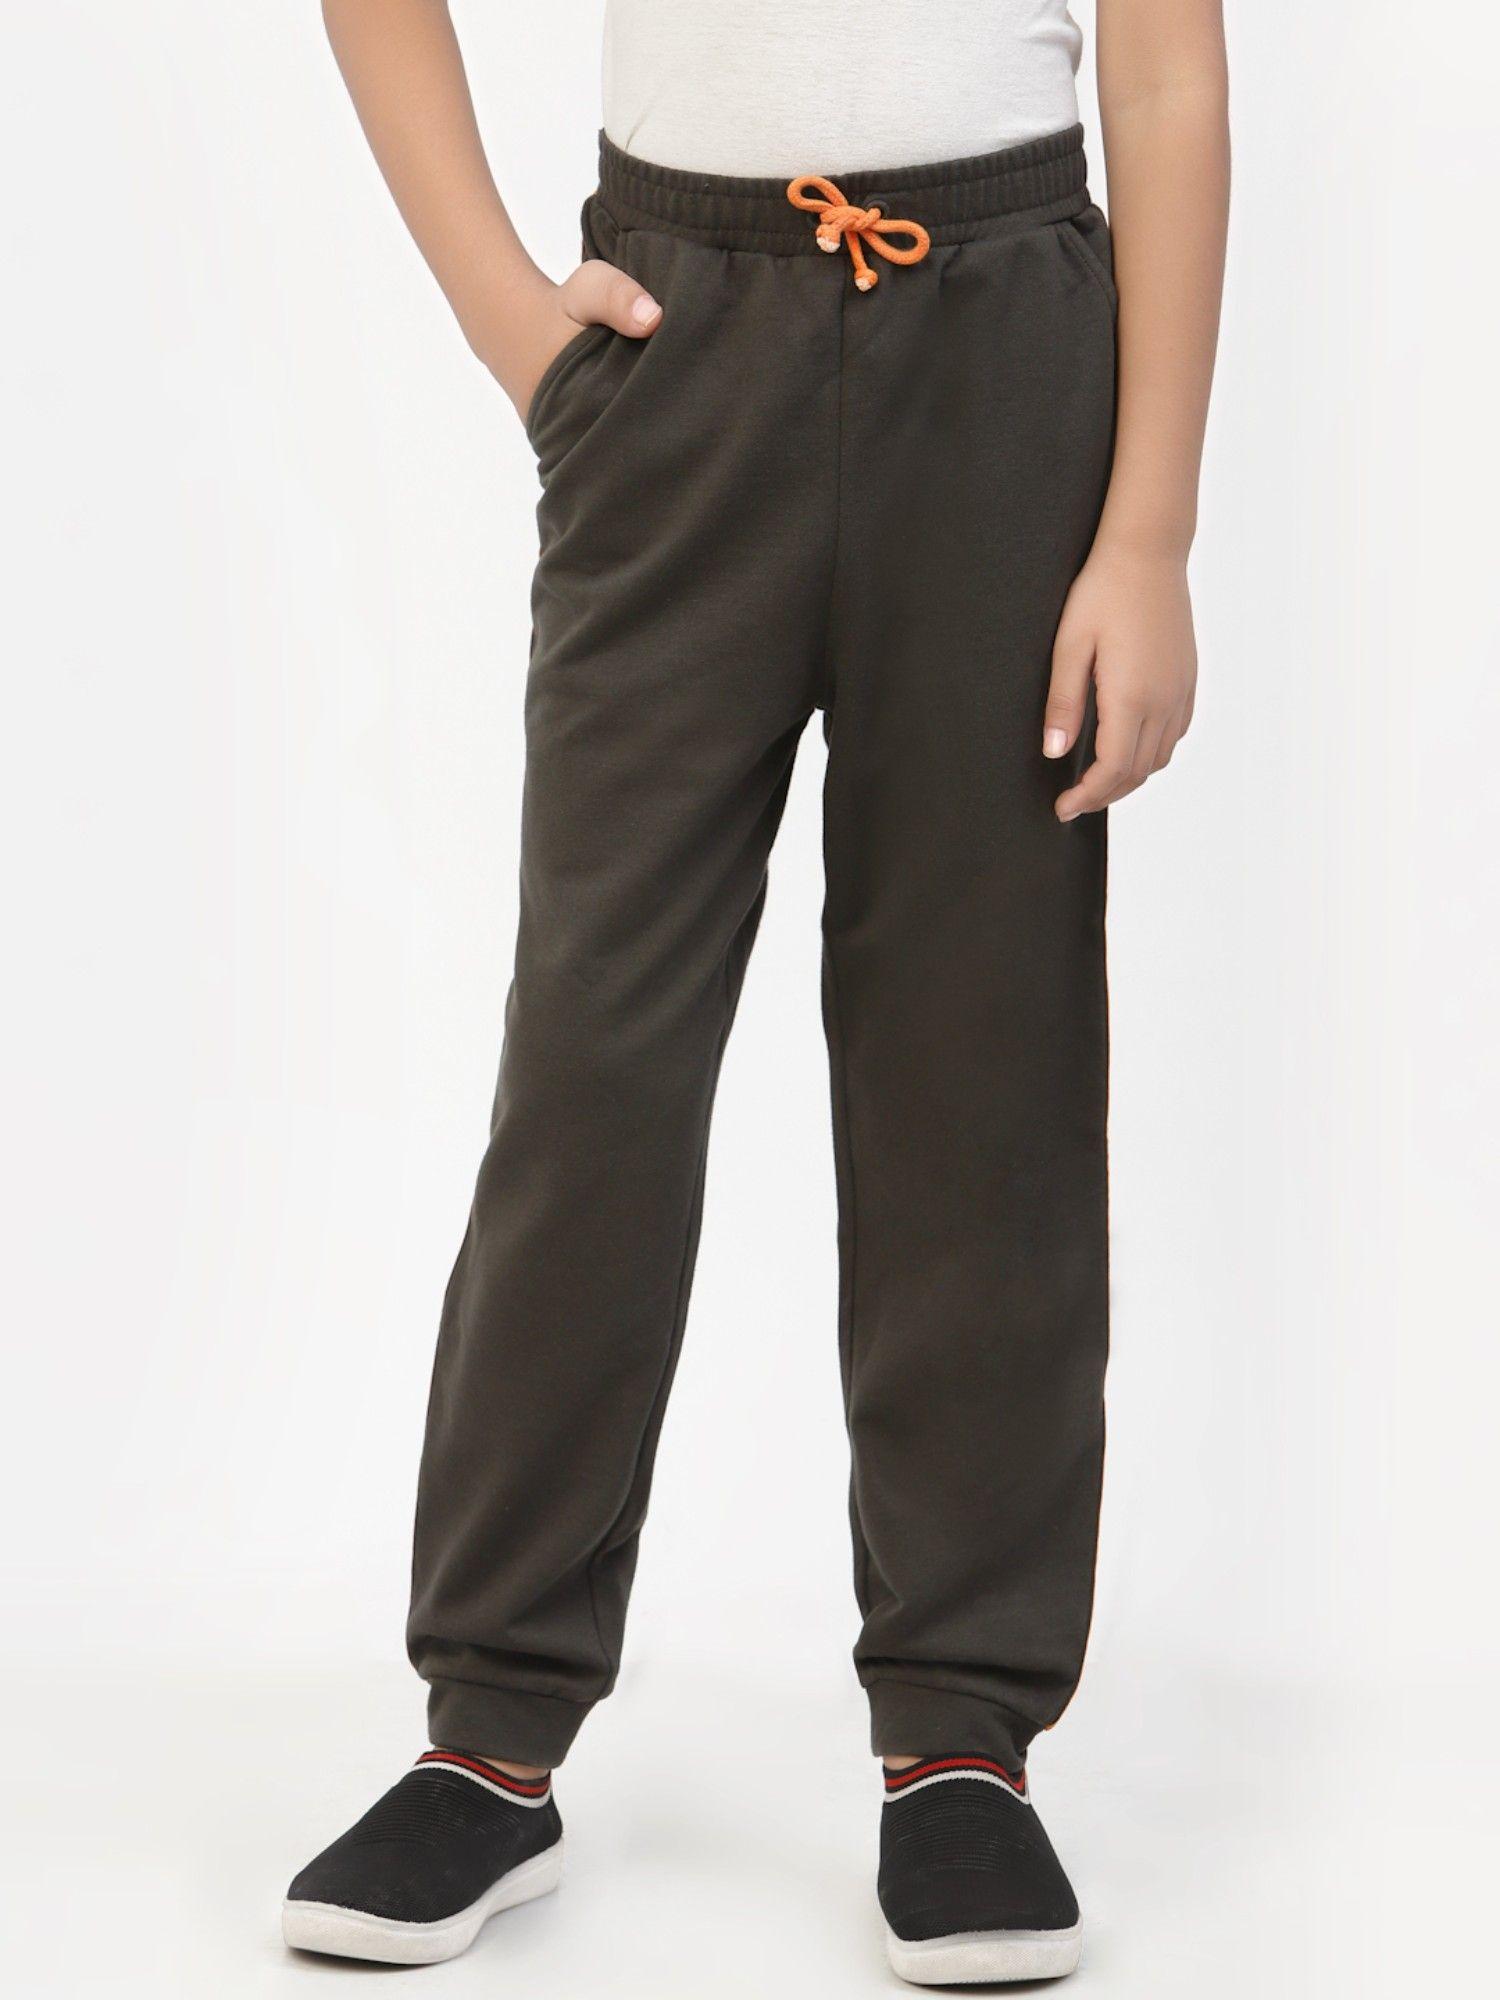 stylish brown organic cotton casual joggers for boys